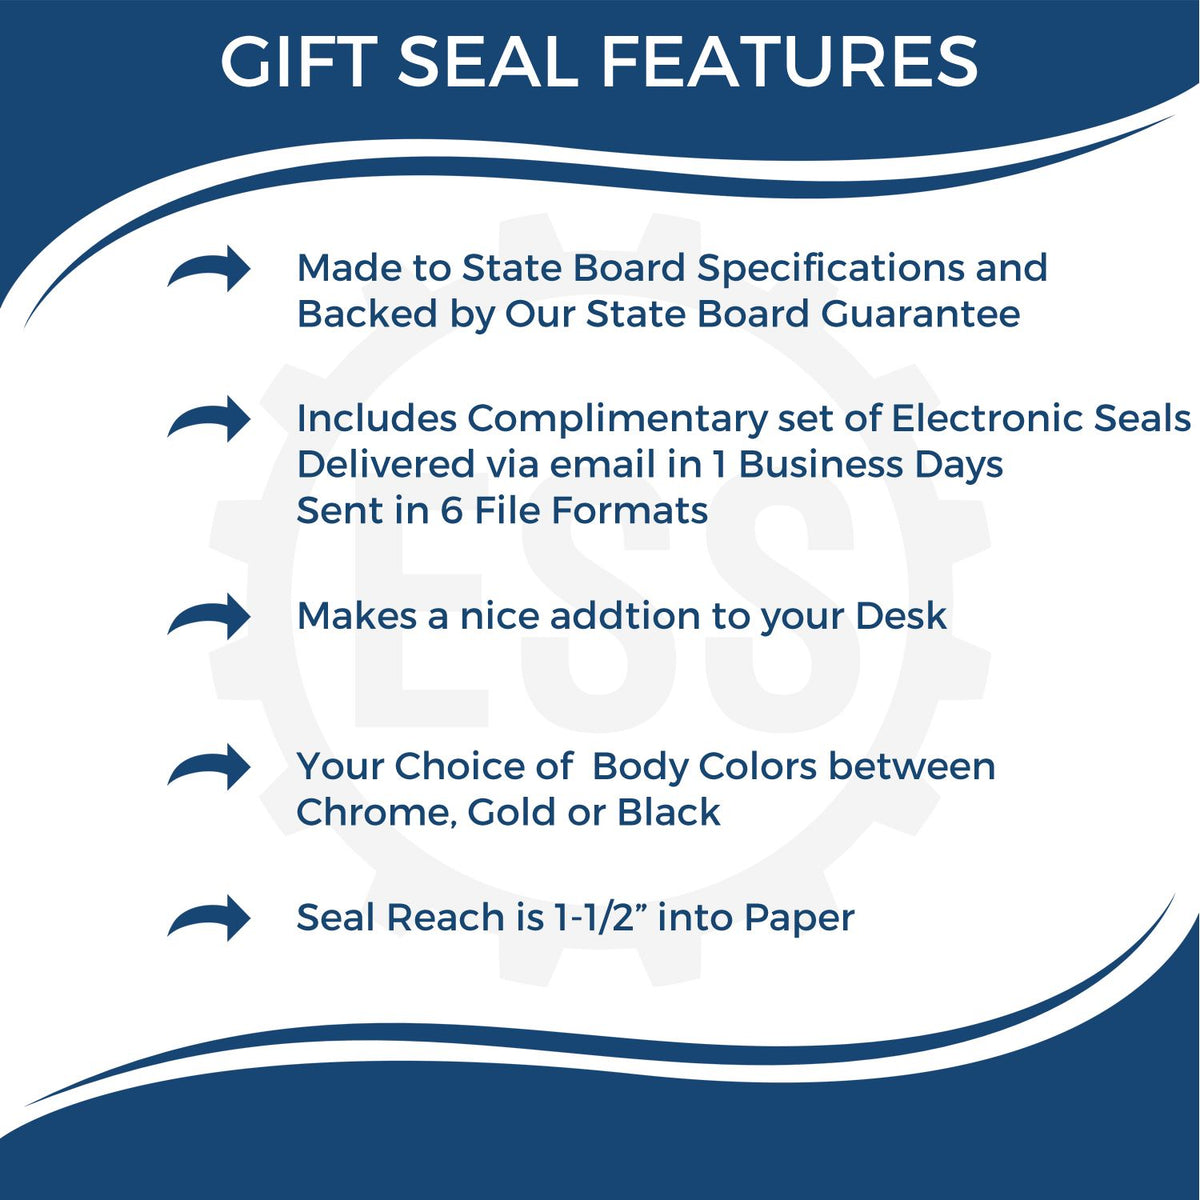 A picture of an infographic highlighting the selling points for the Gift Michigan Engineer Seal